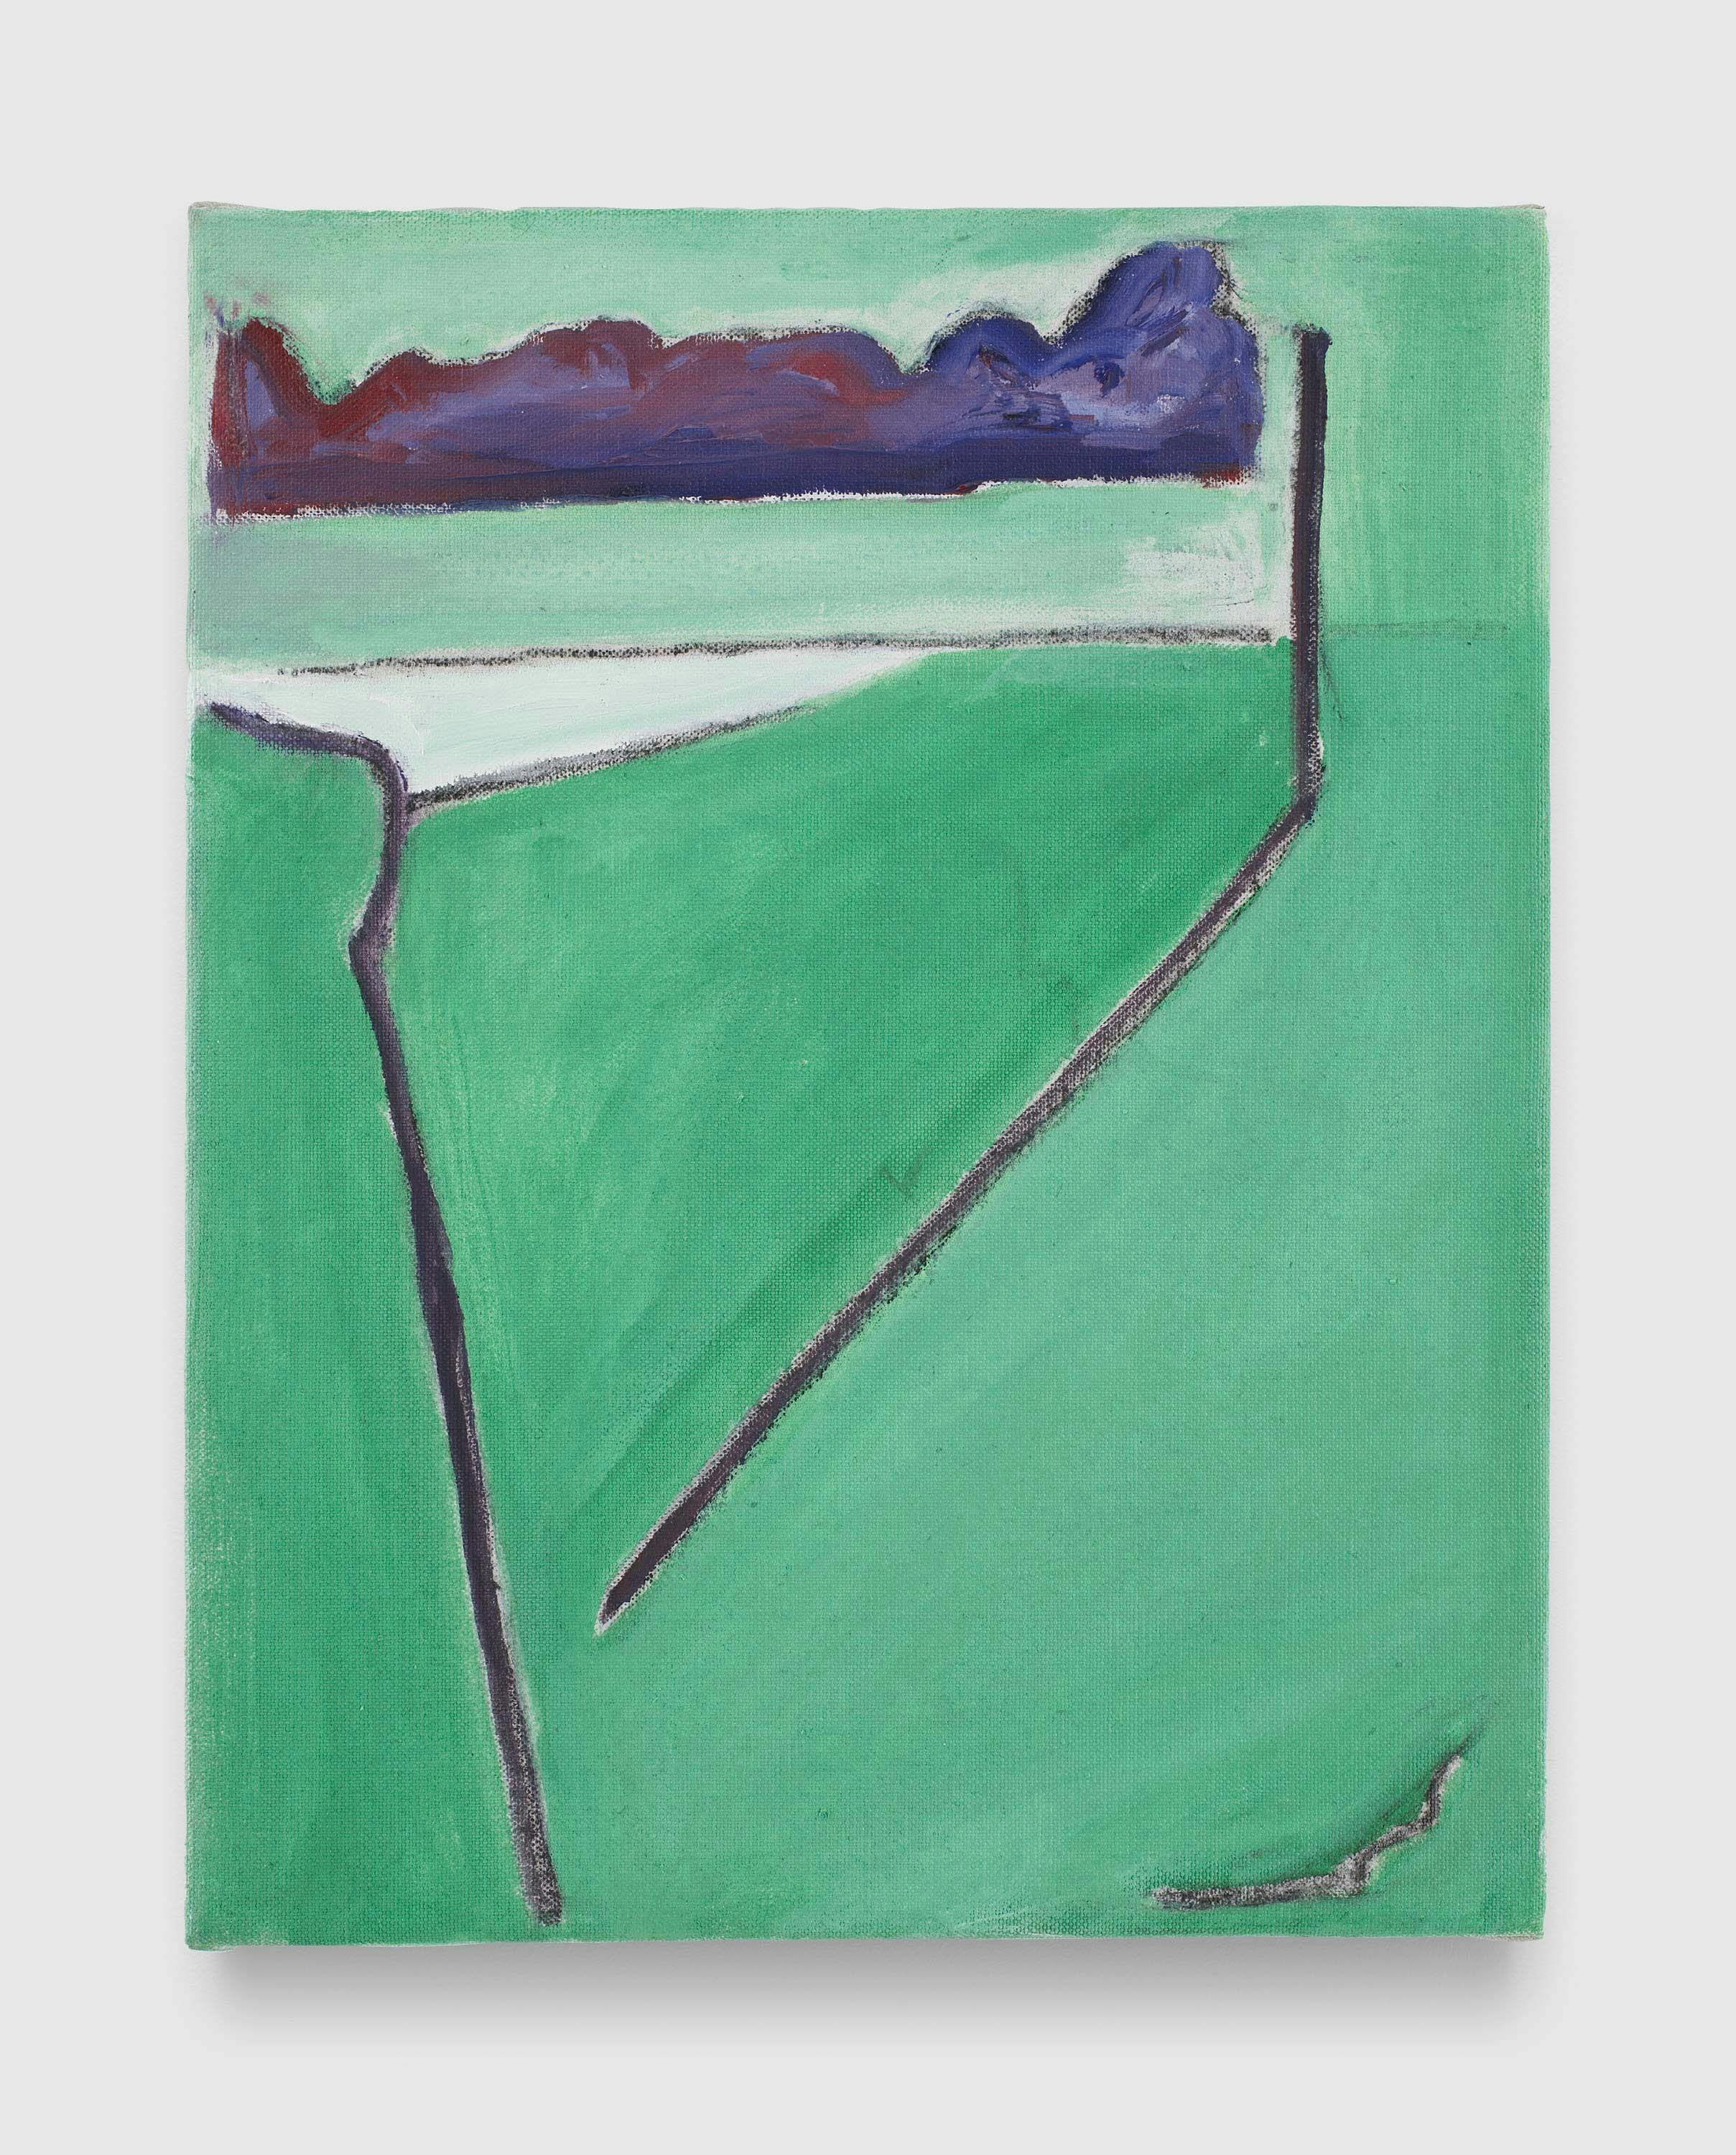 A painting by Raoul De Keyser, titled Edge, dated 2009.